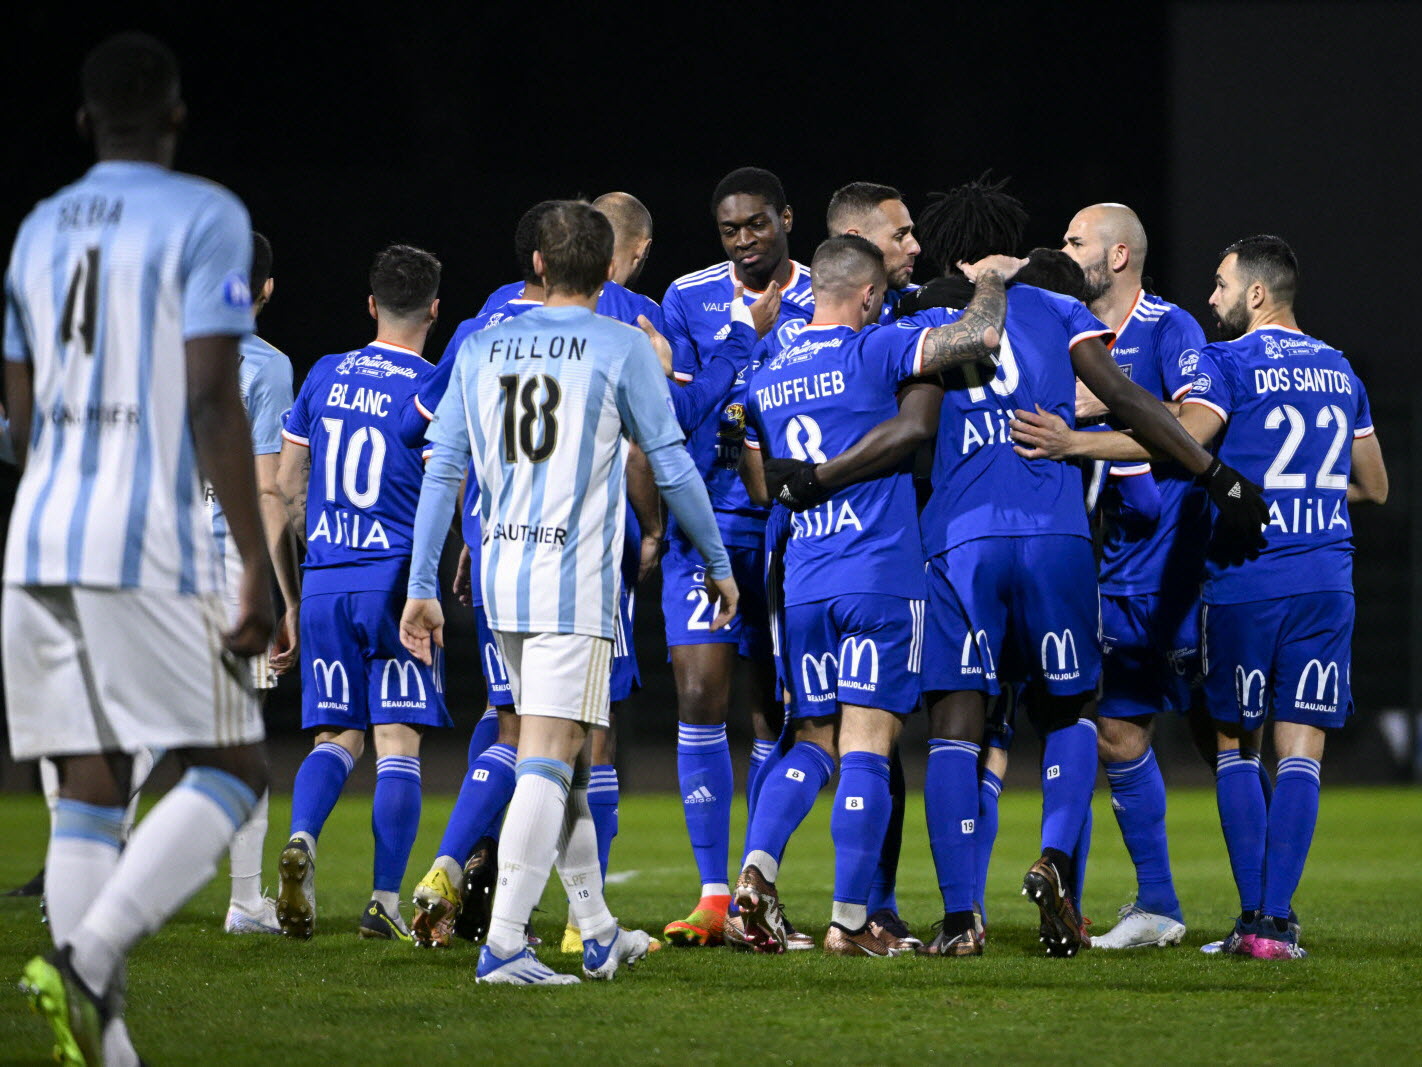 fc-villefranche-11-football-club-facts